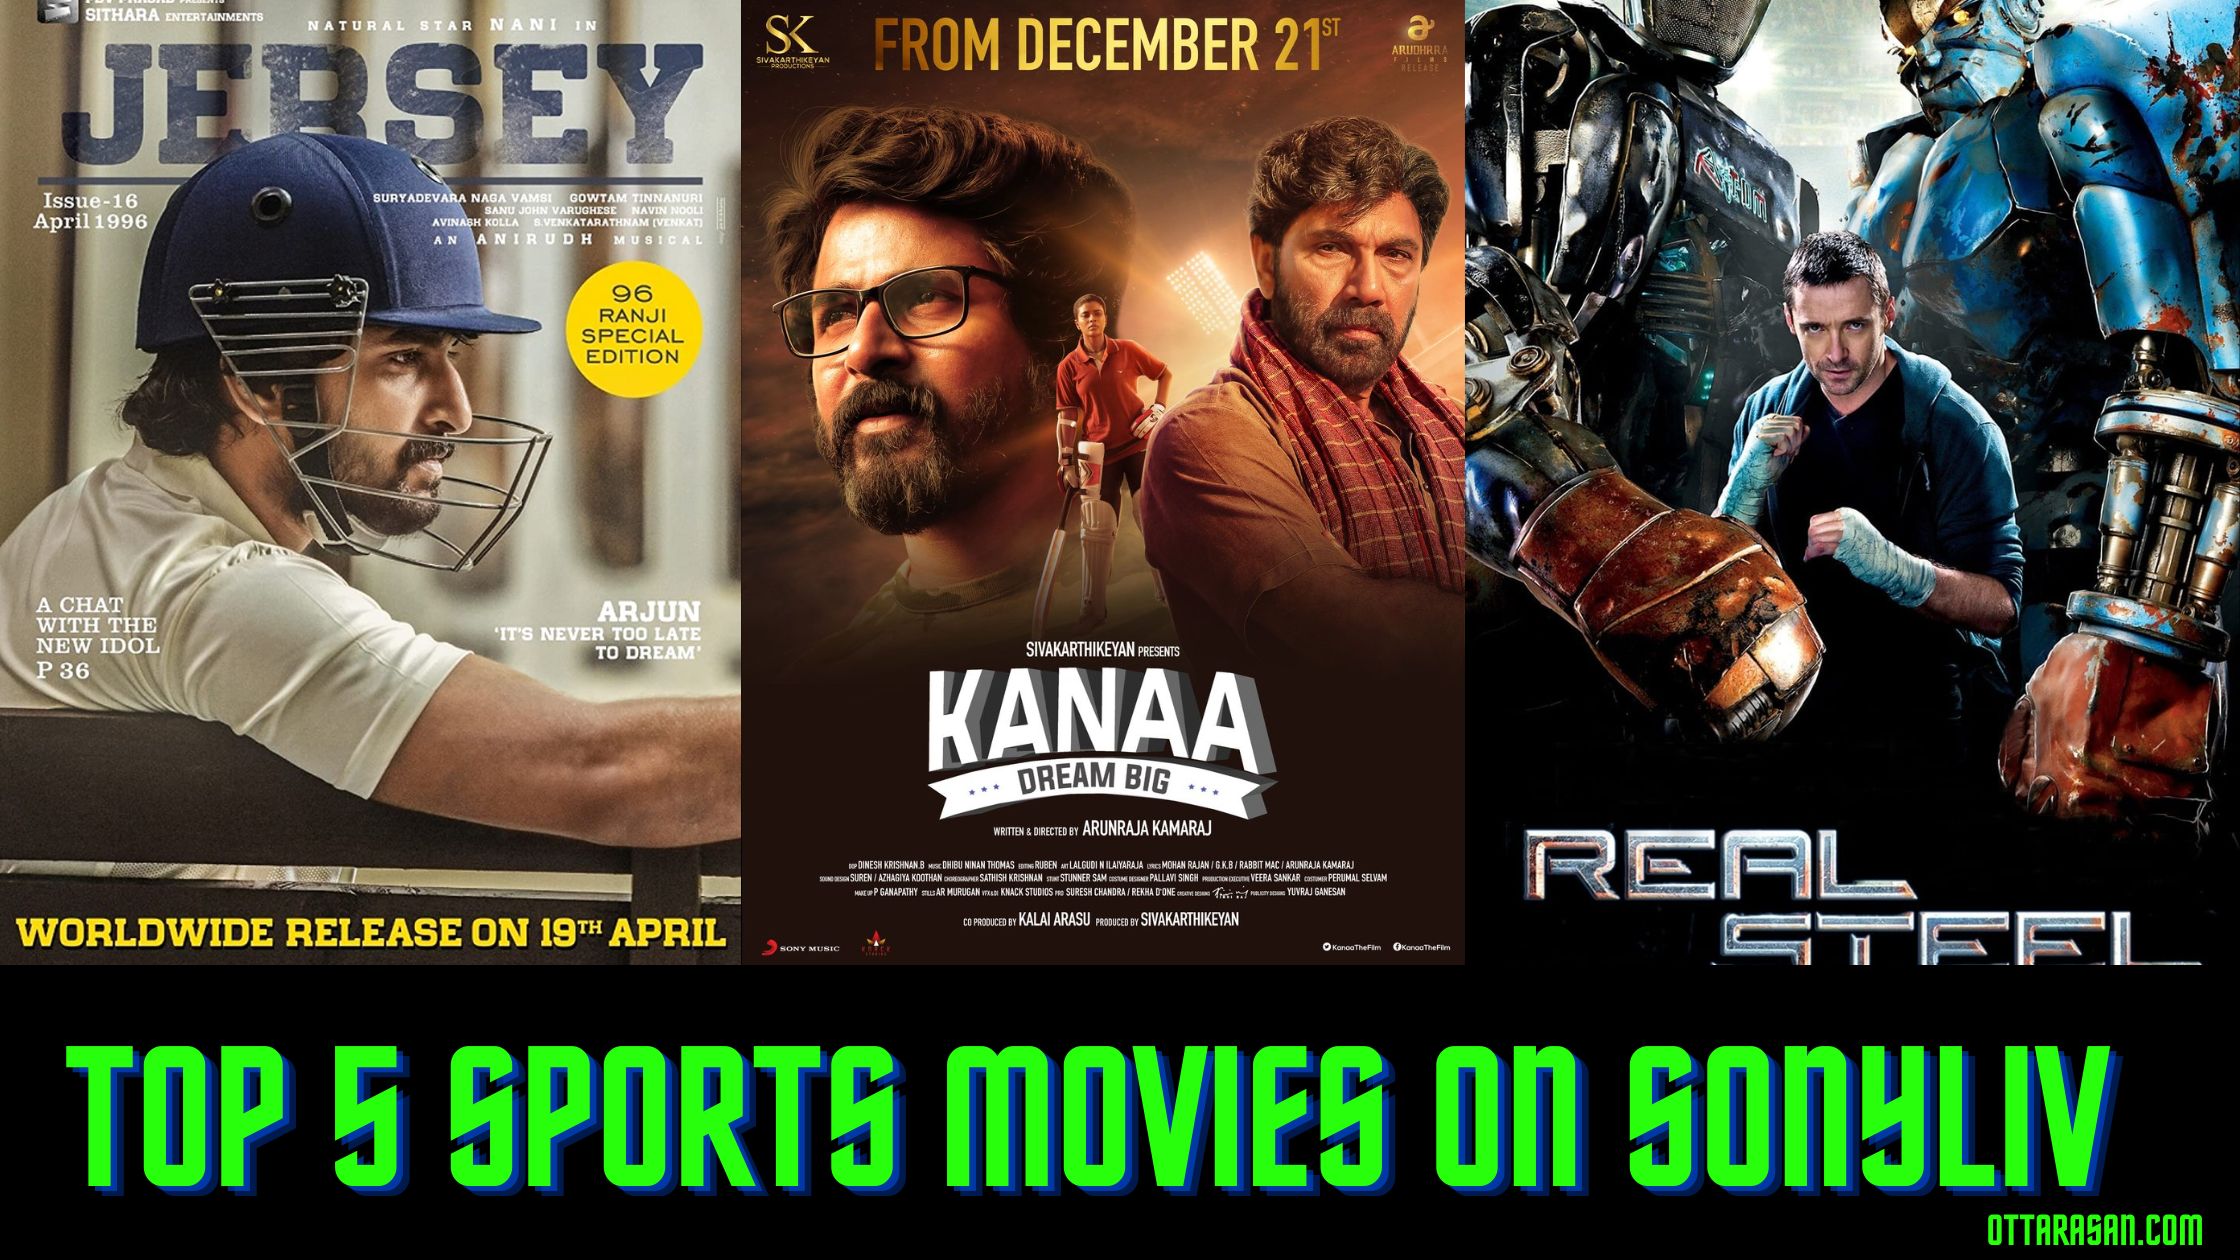 Top 5 Sports Movies On Sonyliv (Recently Updated)